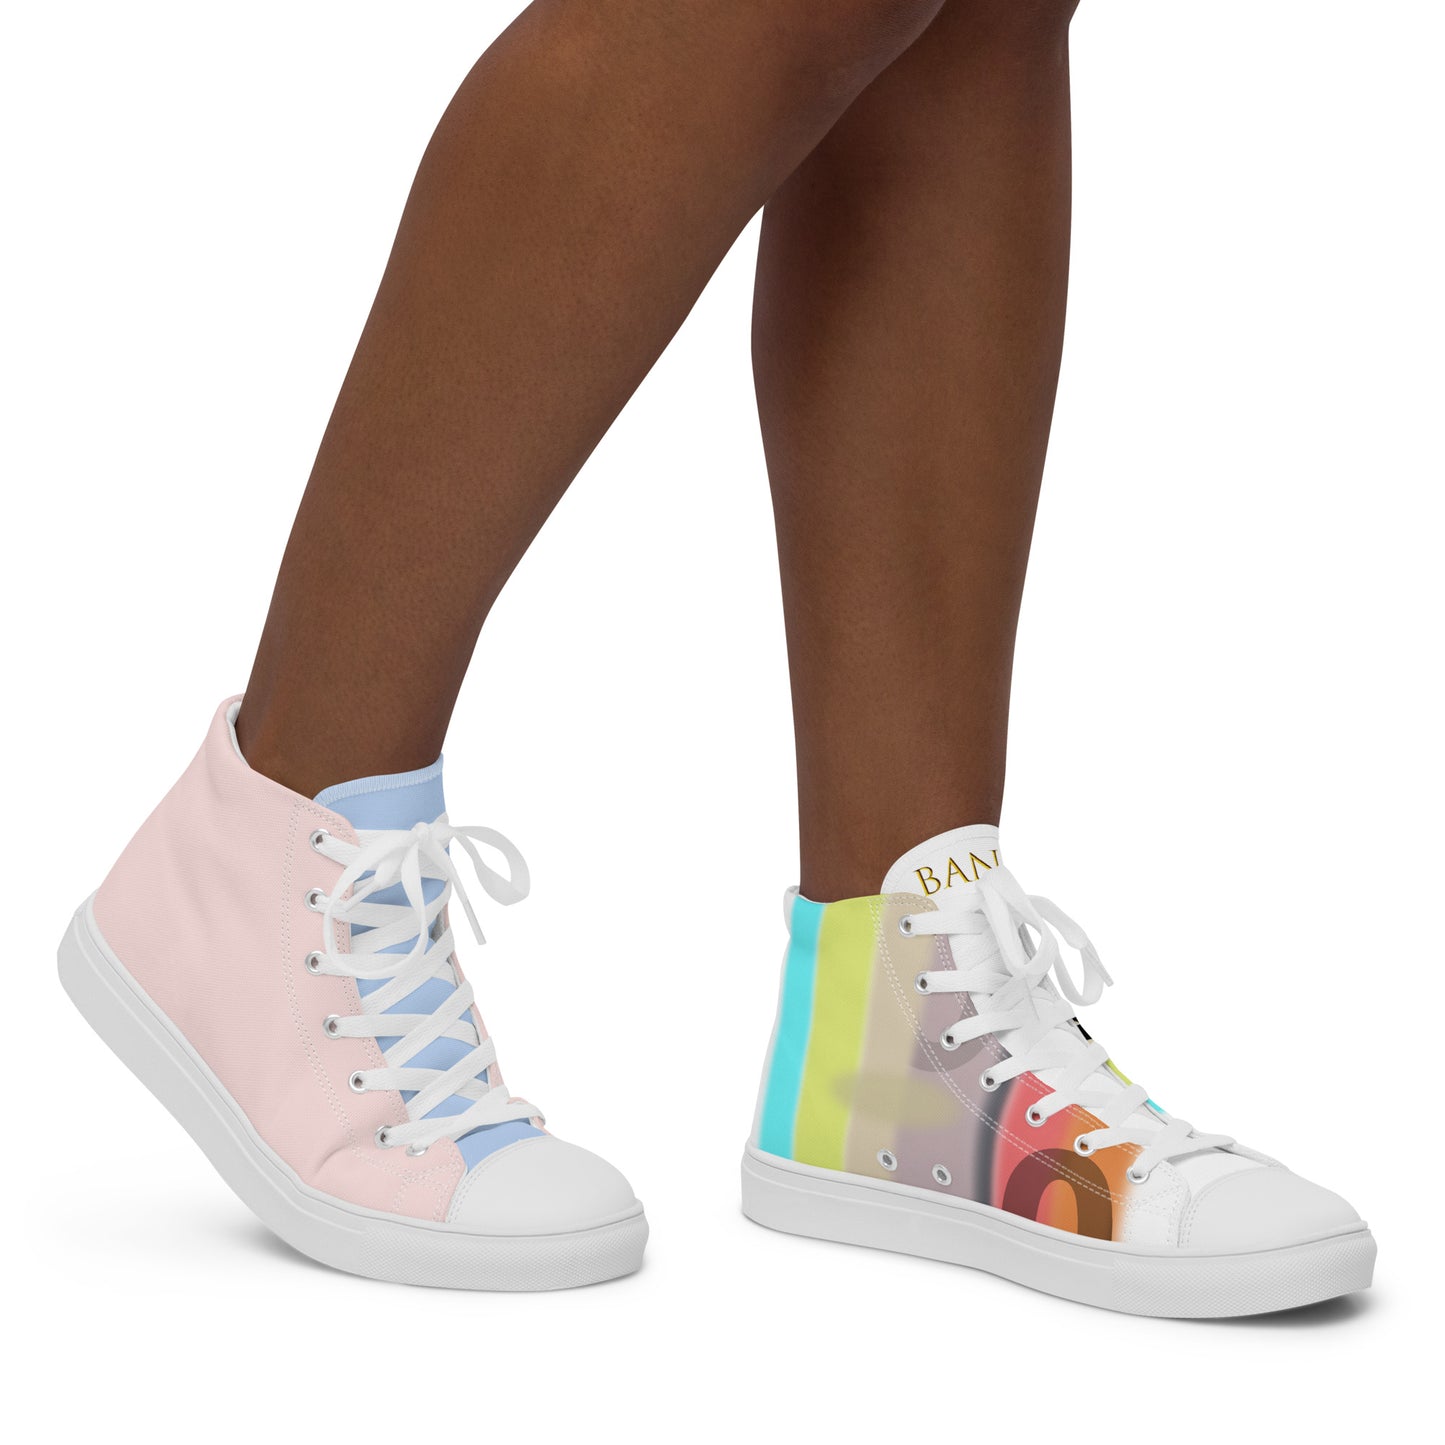 Keep it 100 Women’s high top canvas shoes